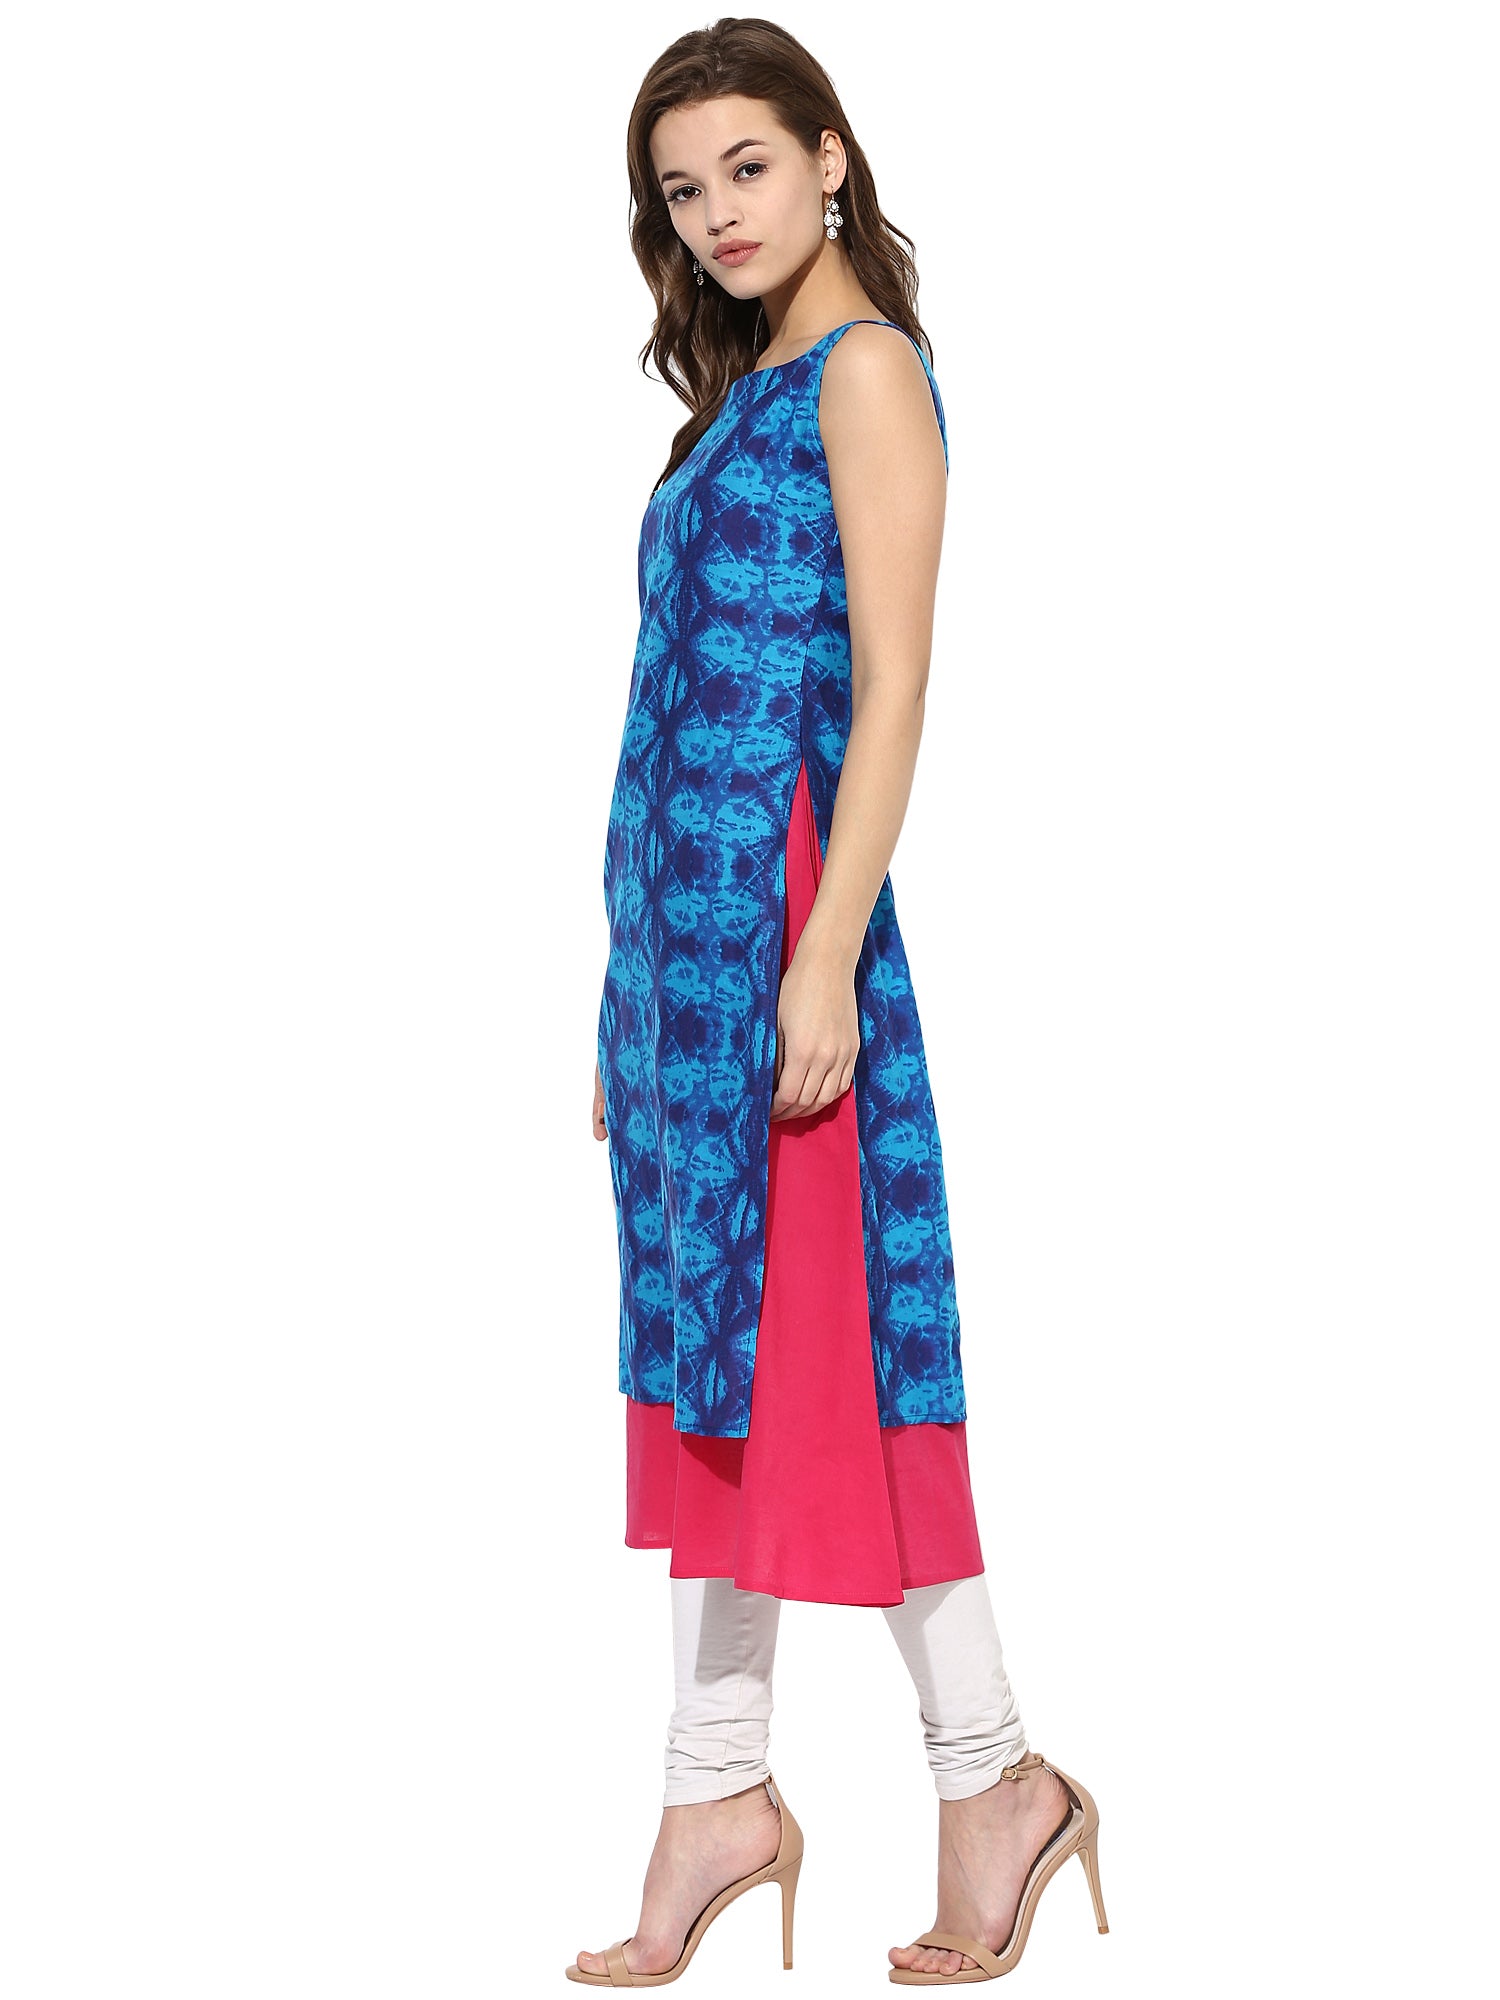 Women's Blue Color Sleeveless And Boat Neck Cotton Only Kurti - Ahalyaa